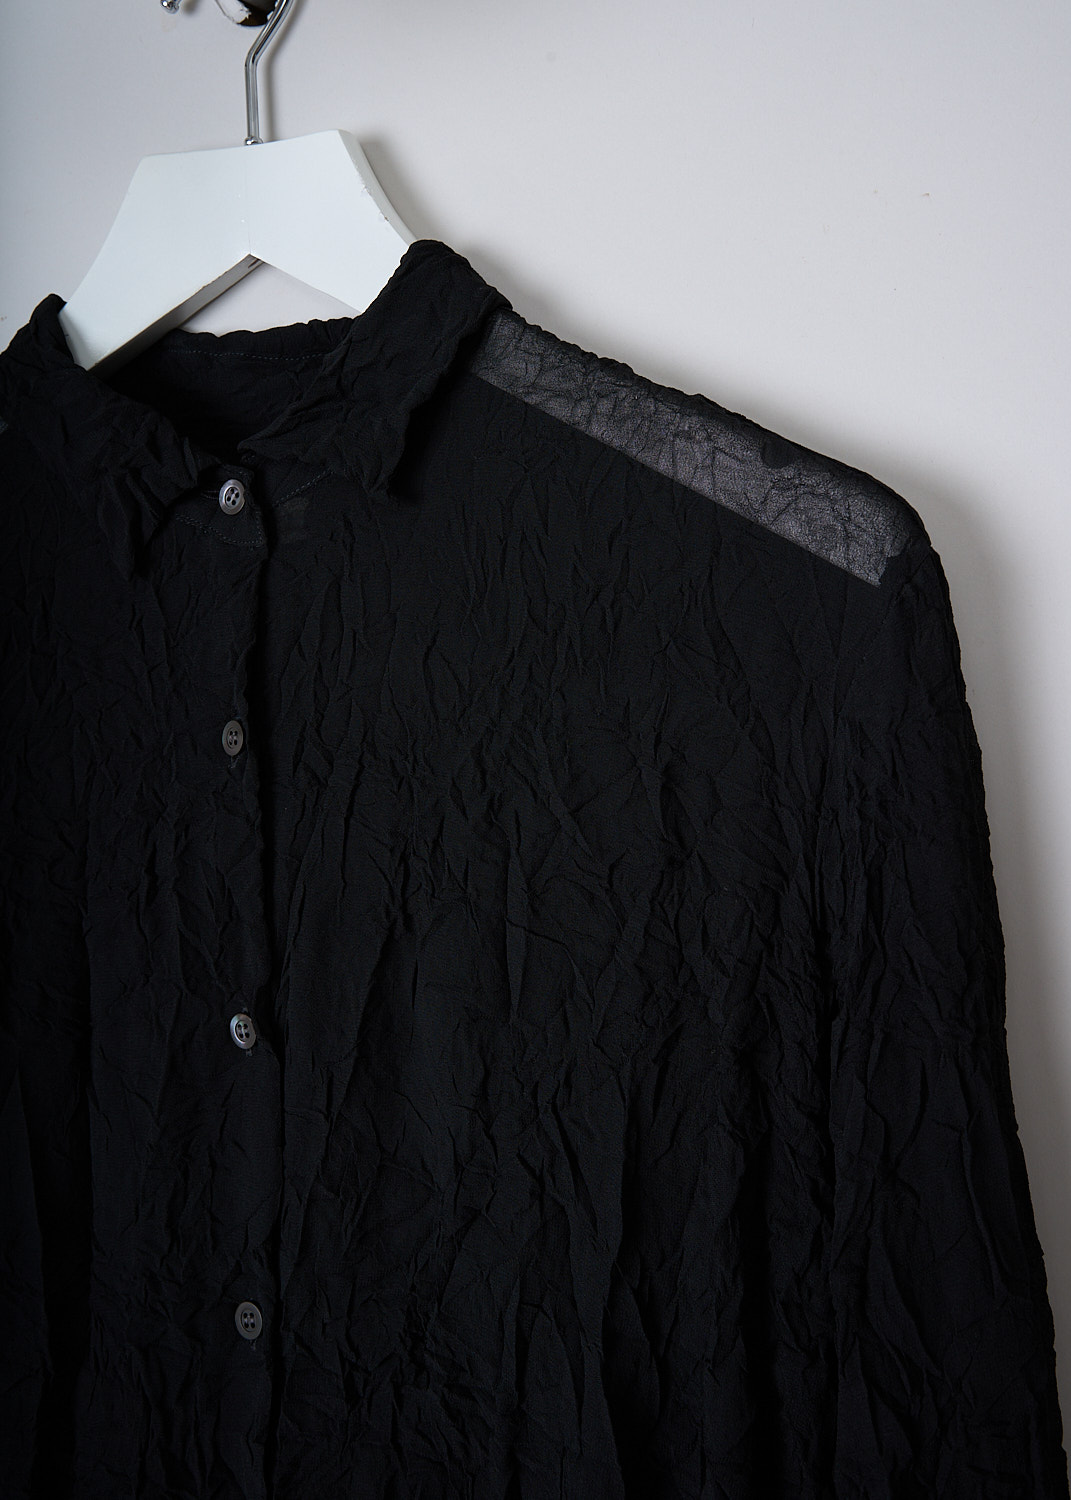 DRIES VAN NOTEN, BLACK CRUSHED BLOUSE, CRUSHED_6265_WW_SHIRT_BLACK, Black, Detail, This crushed black blouse has a spread collar and a front button closure. The blouse is slightly see-though. The long sleeves have buttoned cuffs. 
